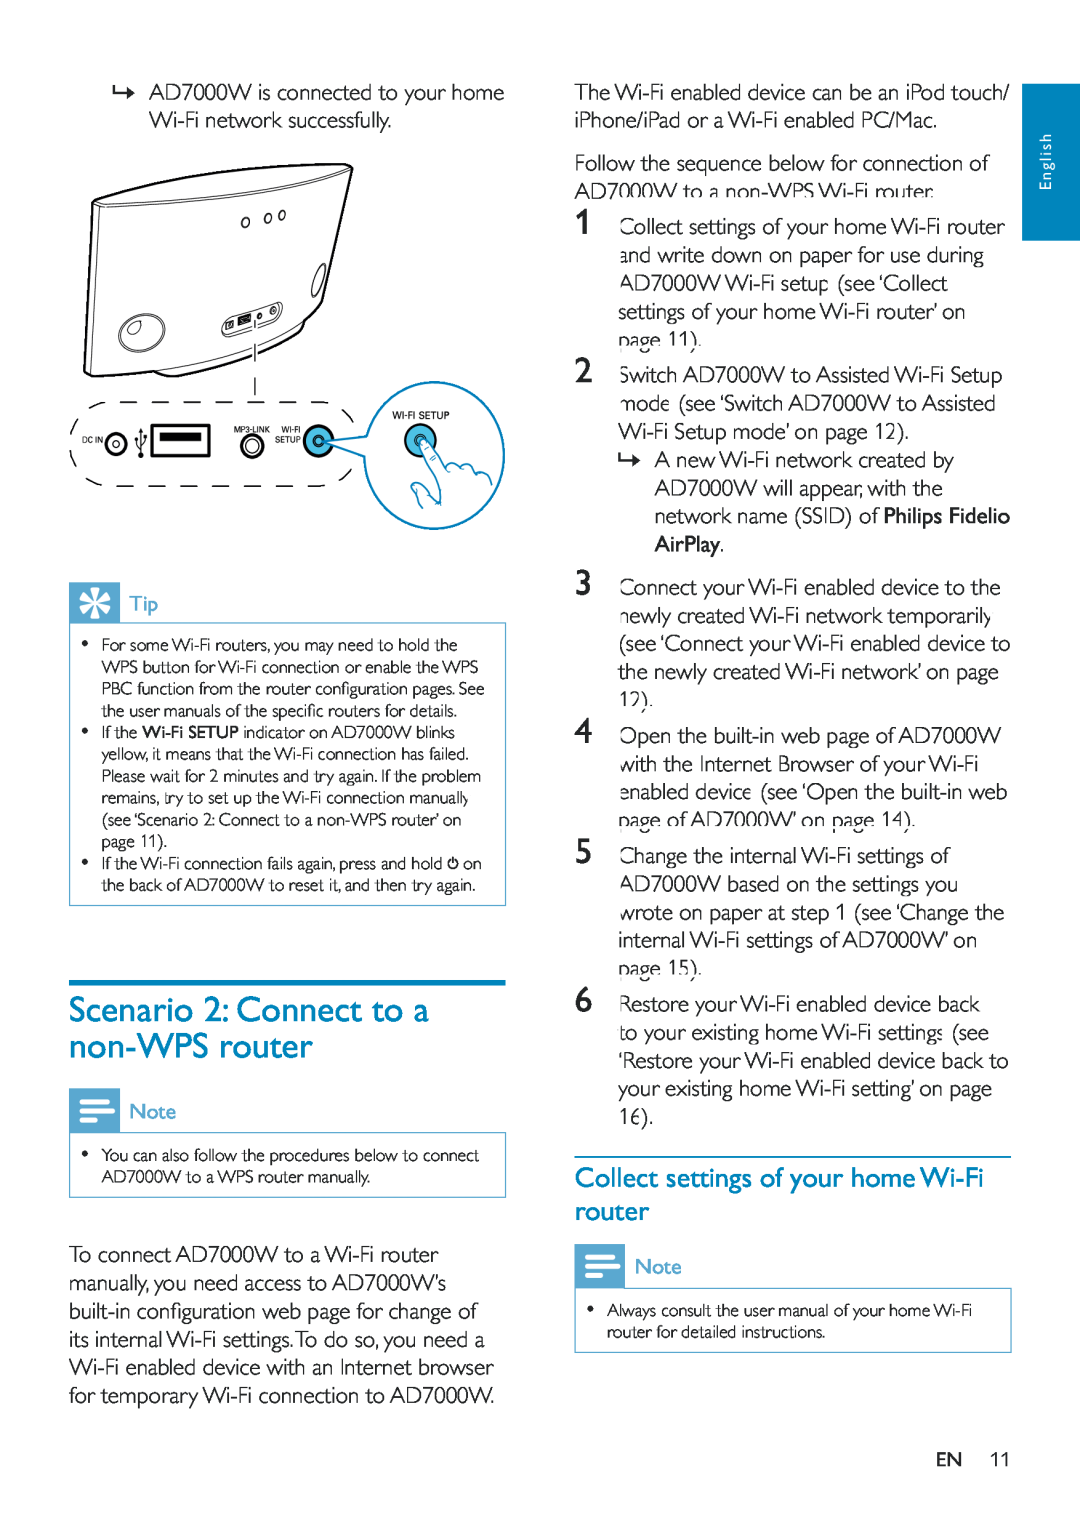 Philips AD7000W/12 user manual Scenario 2 Connect to a non-WPSrouter, Collect settings of your home Wi-Firouter 